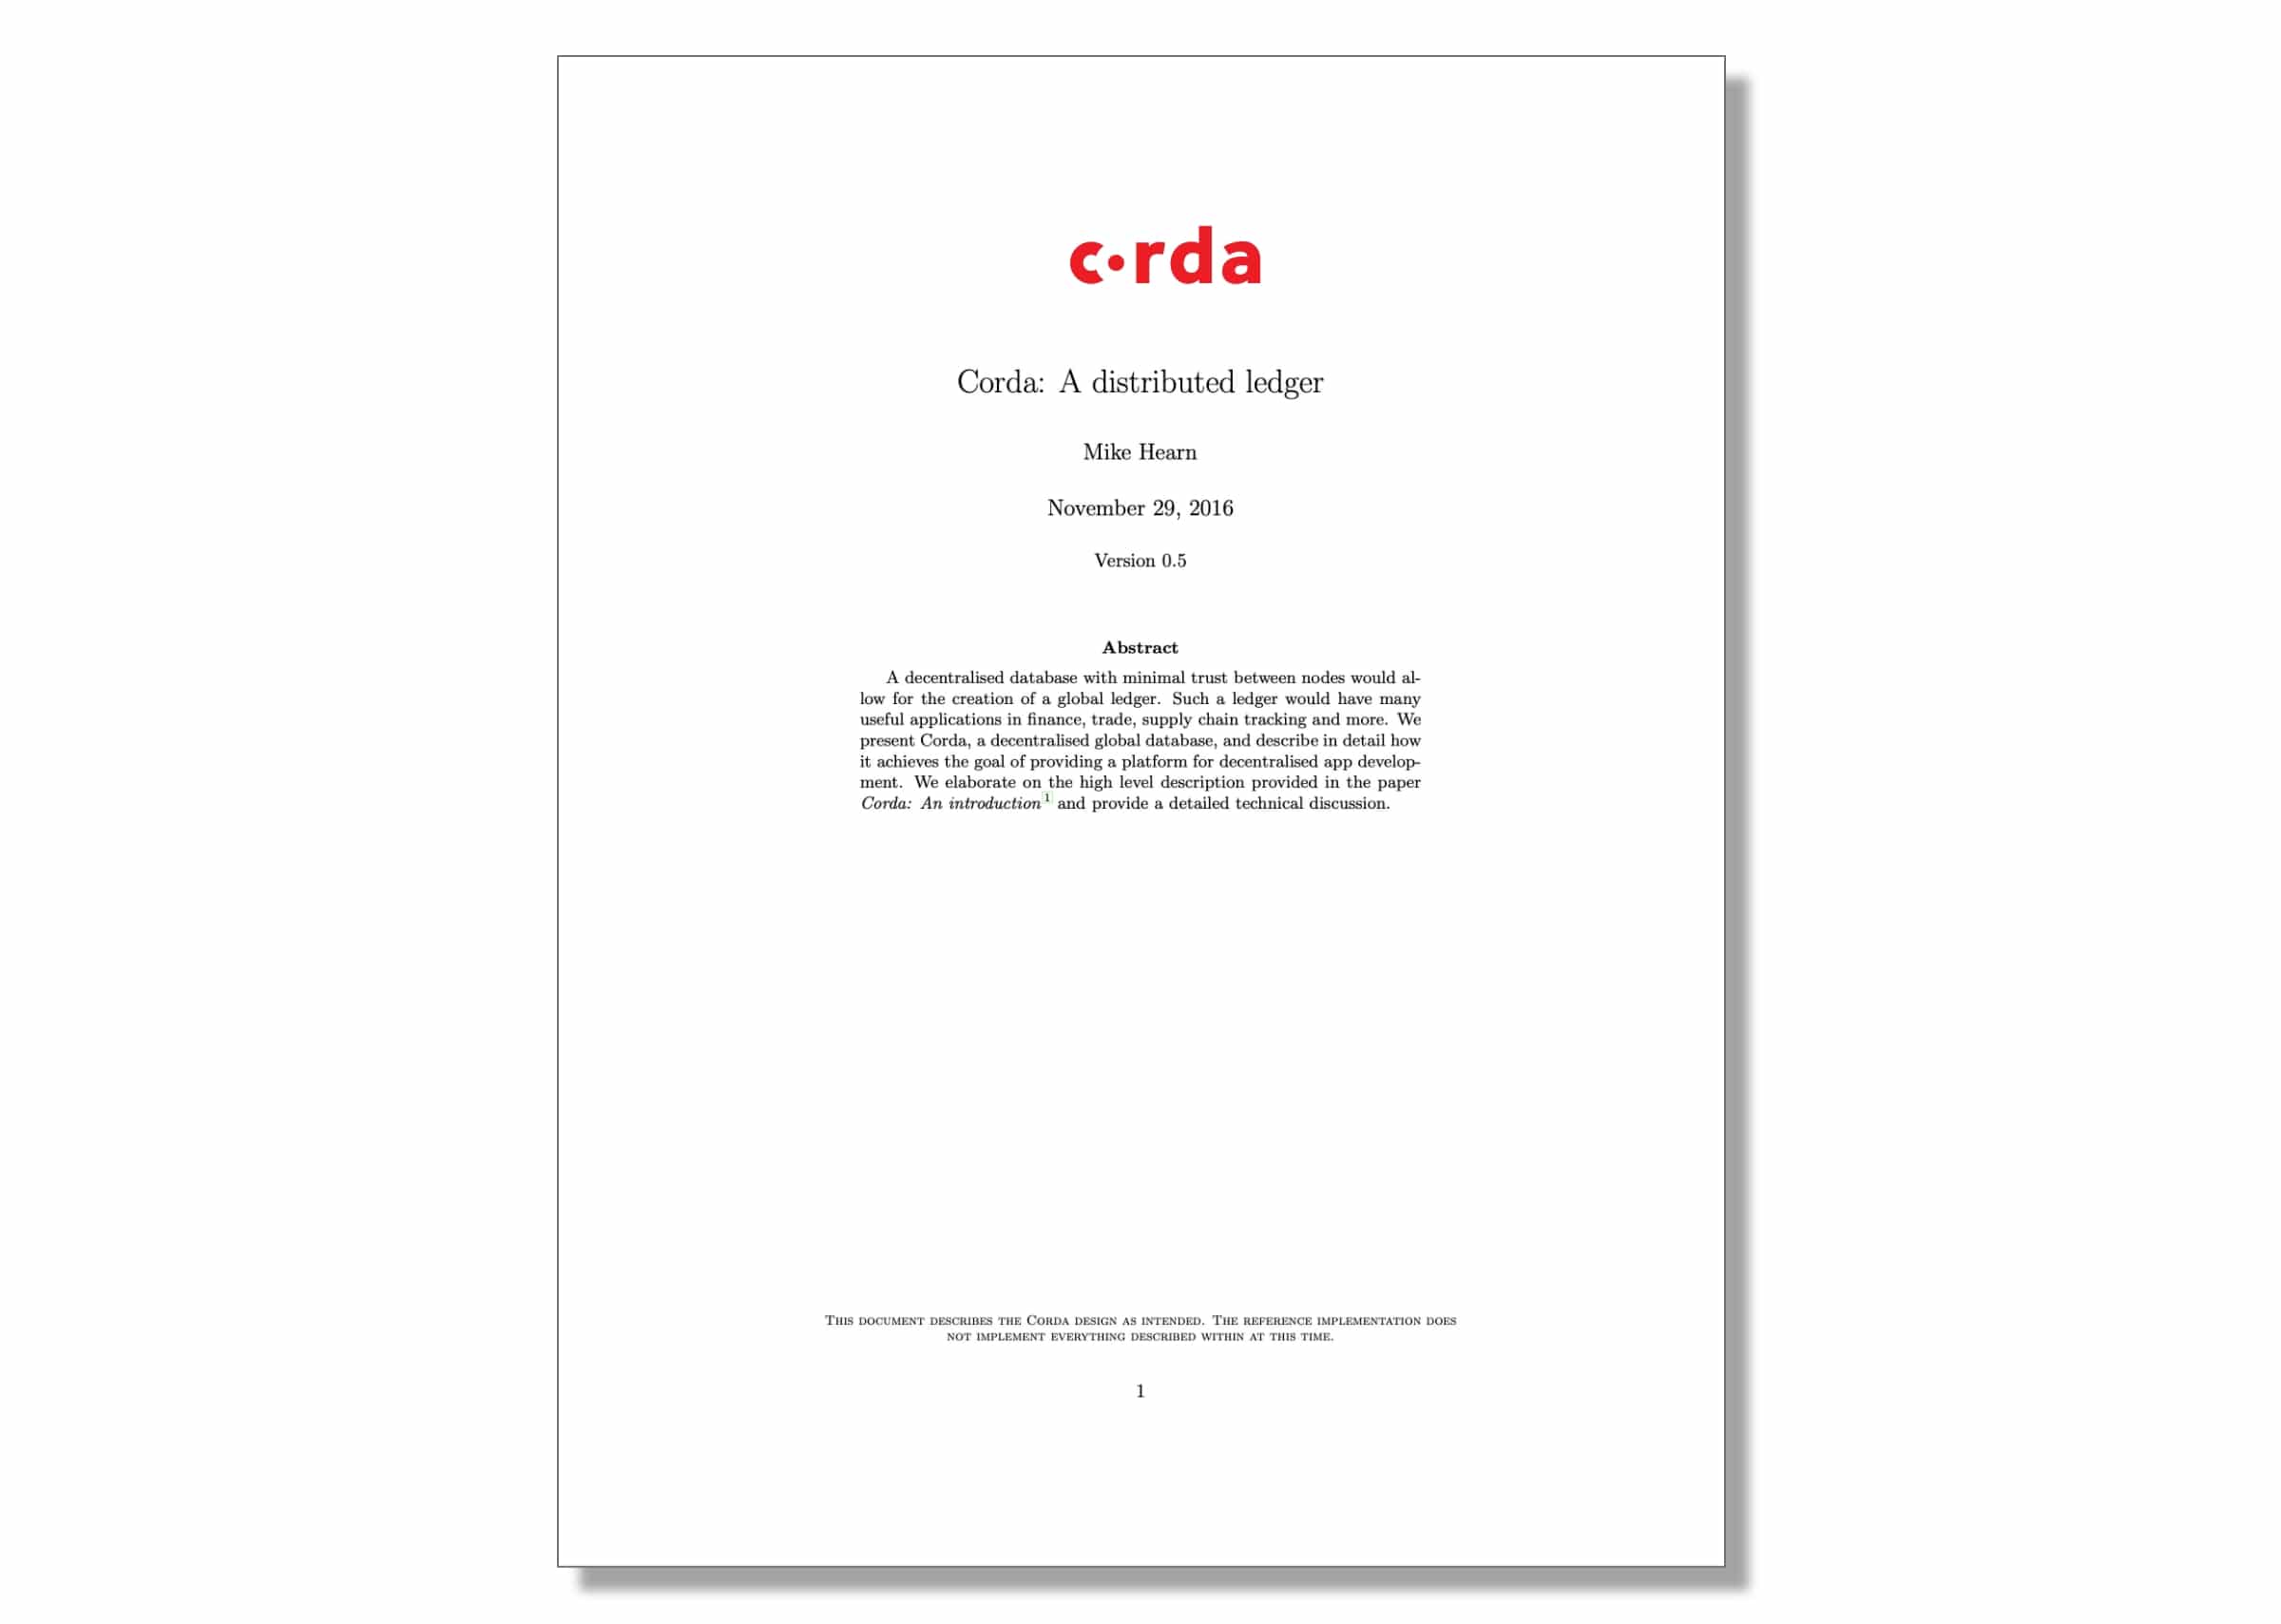 Corda: A Distributed Ledger background